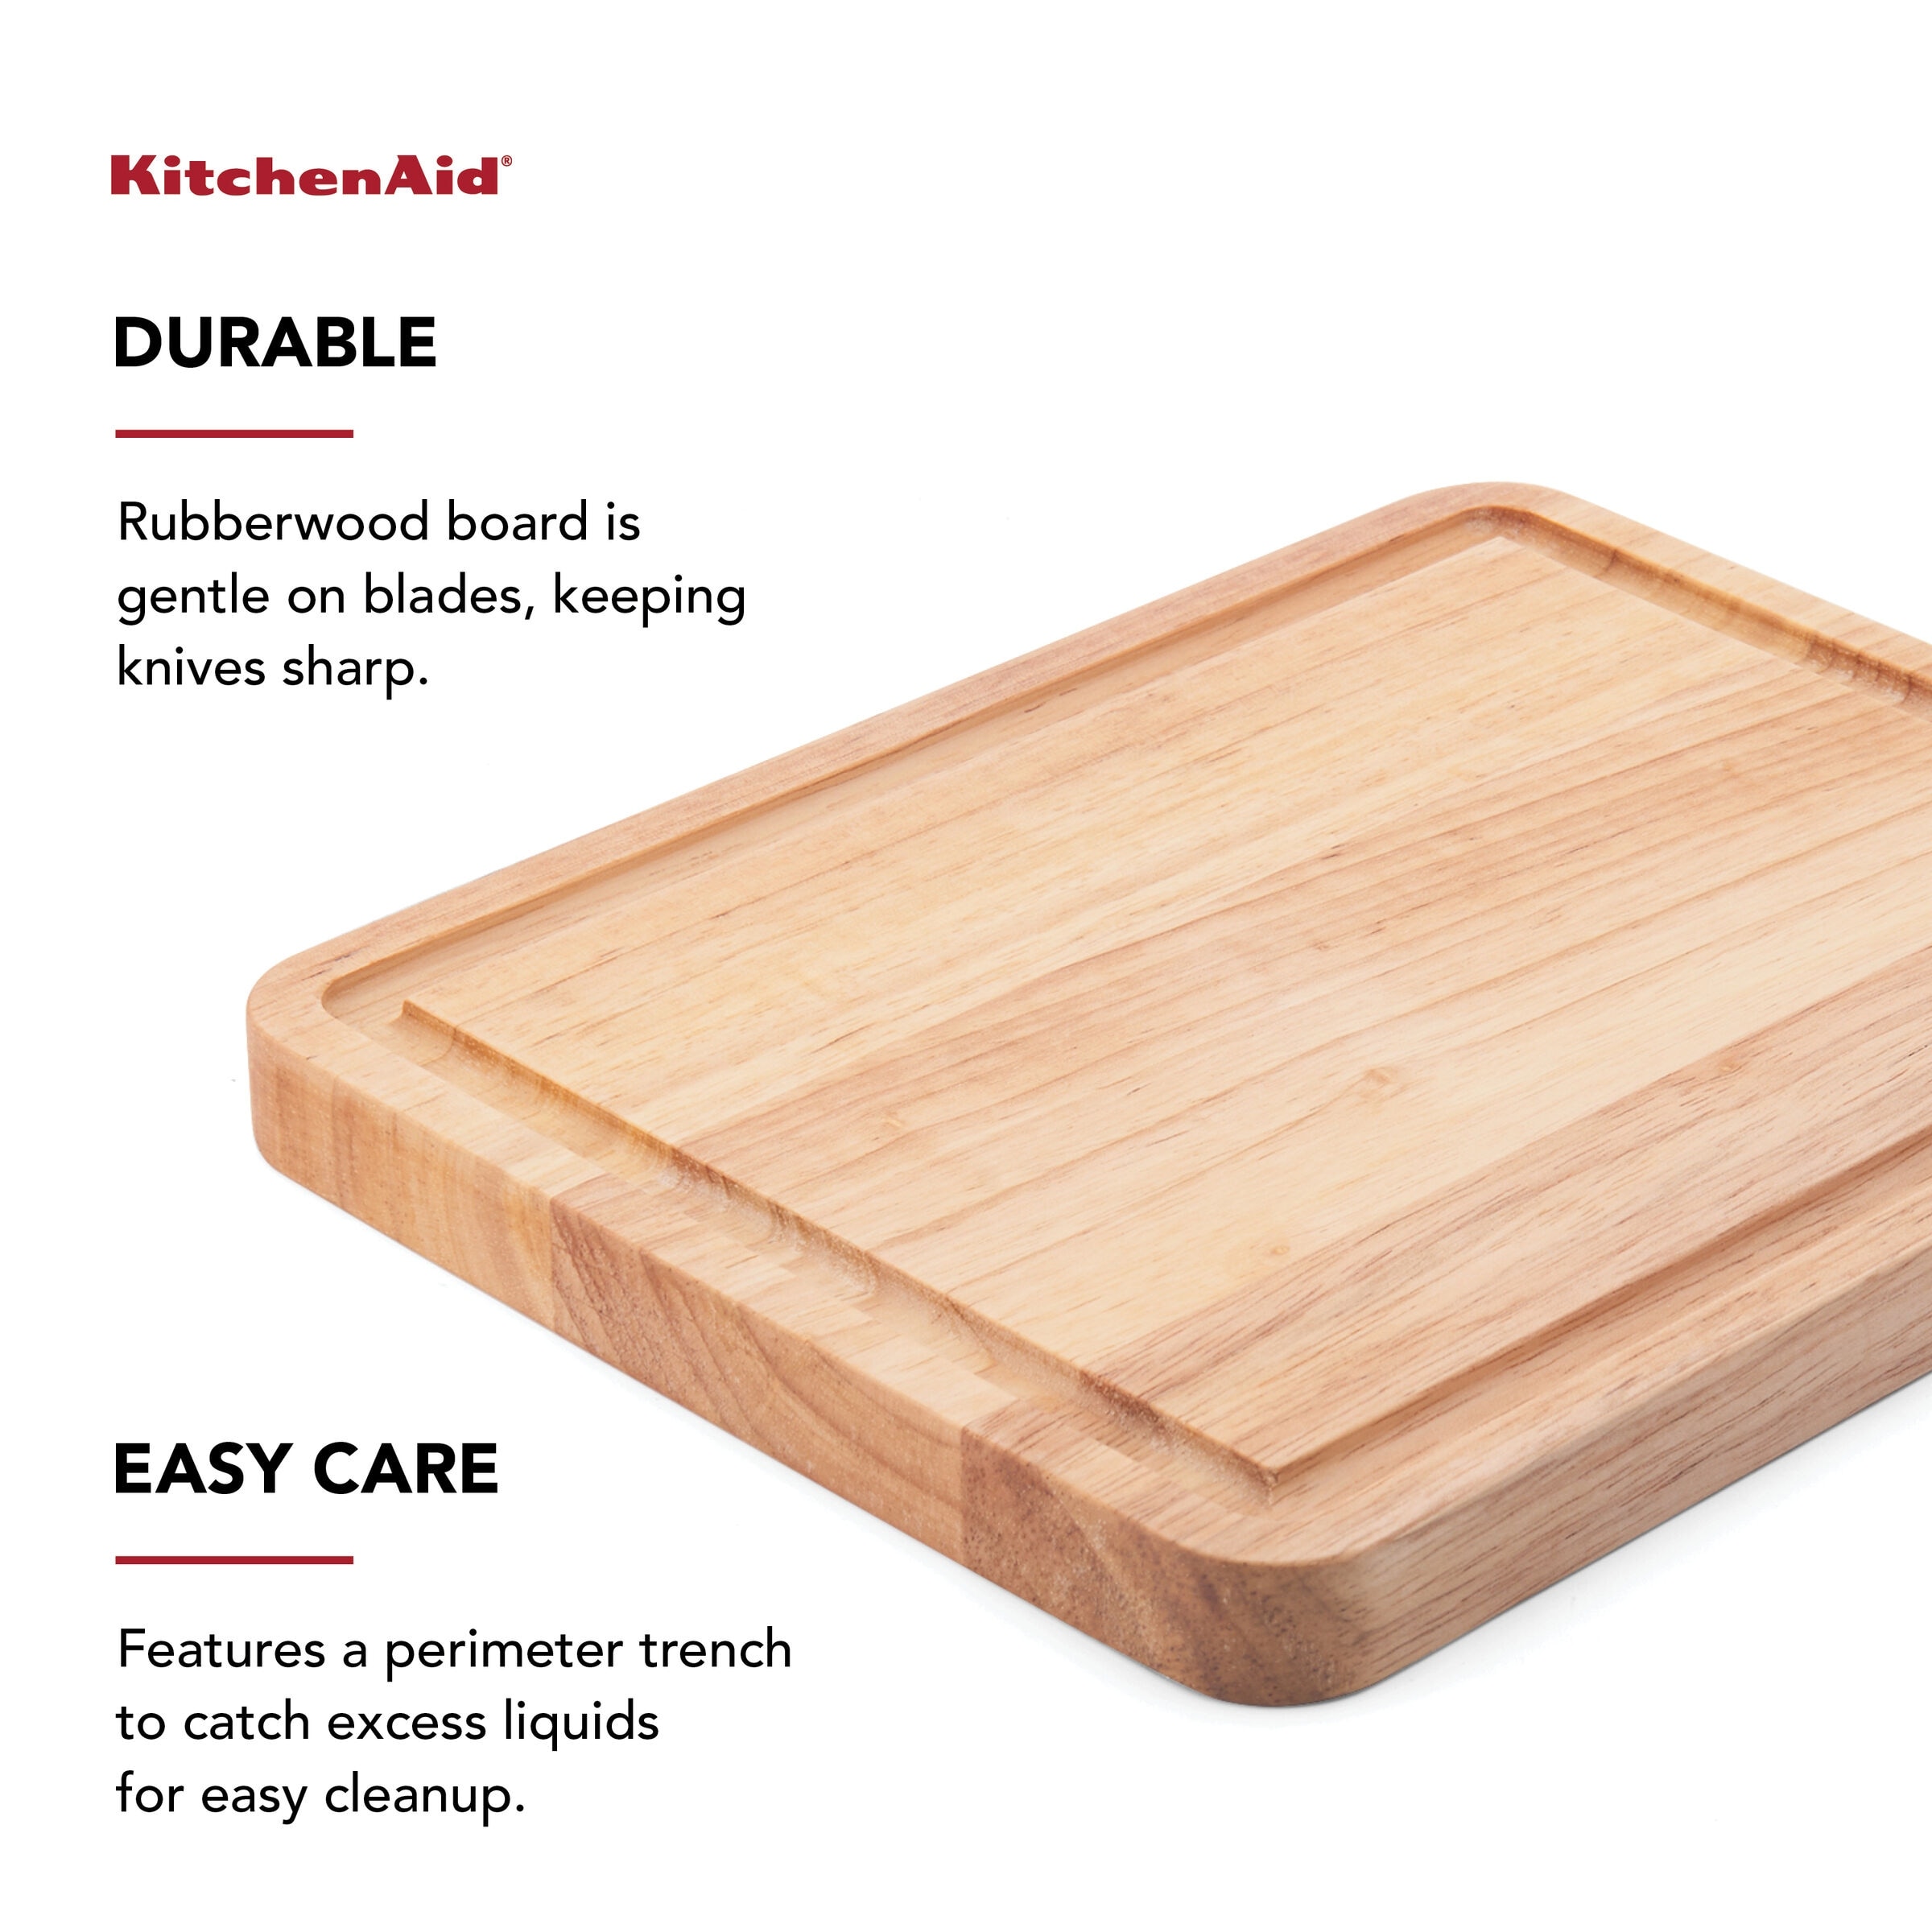 https://ak1.ostkcdn.com/images/products/is/images/direct/bb14853570a570777de7372ab48842fc3a5df84a/KitchenAid-Classic-Wood-Cutting-Board%2C-8x10-Inch%2C-Natural.jpg